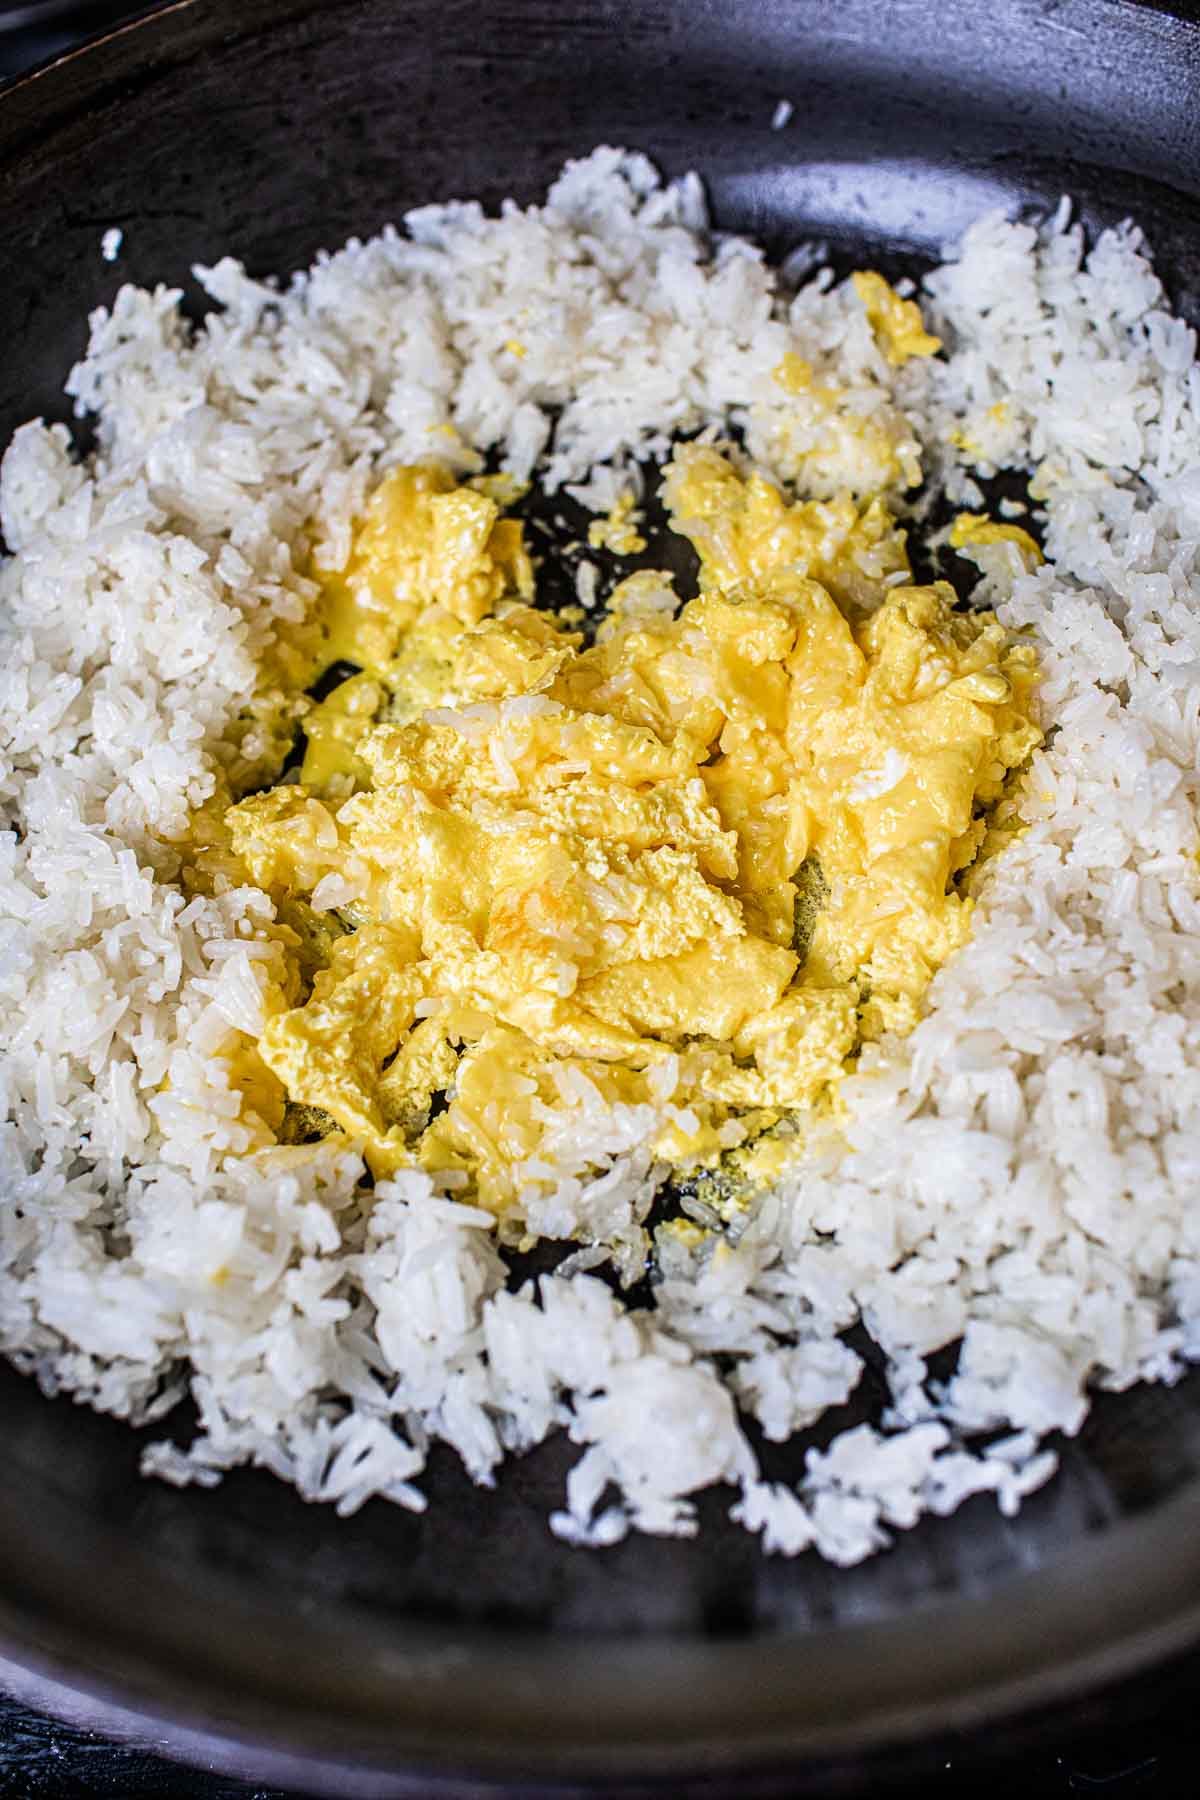 Scrambled eggs in the crater of jasmine rice